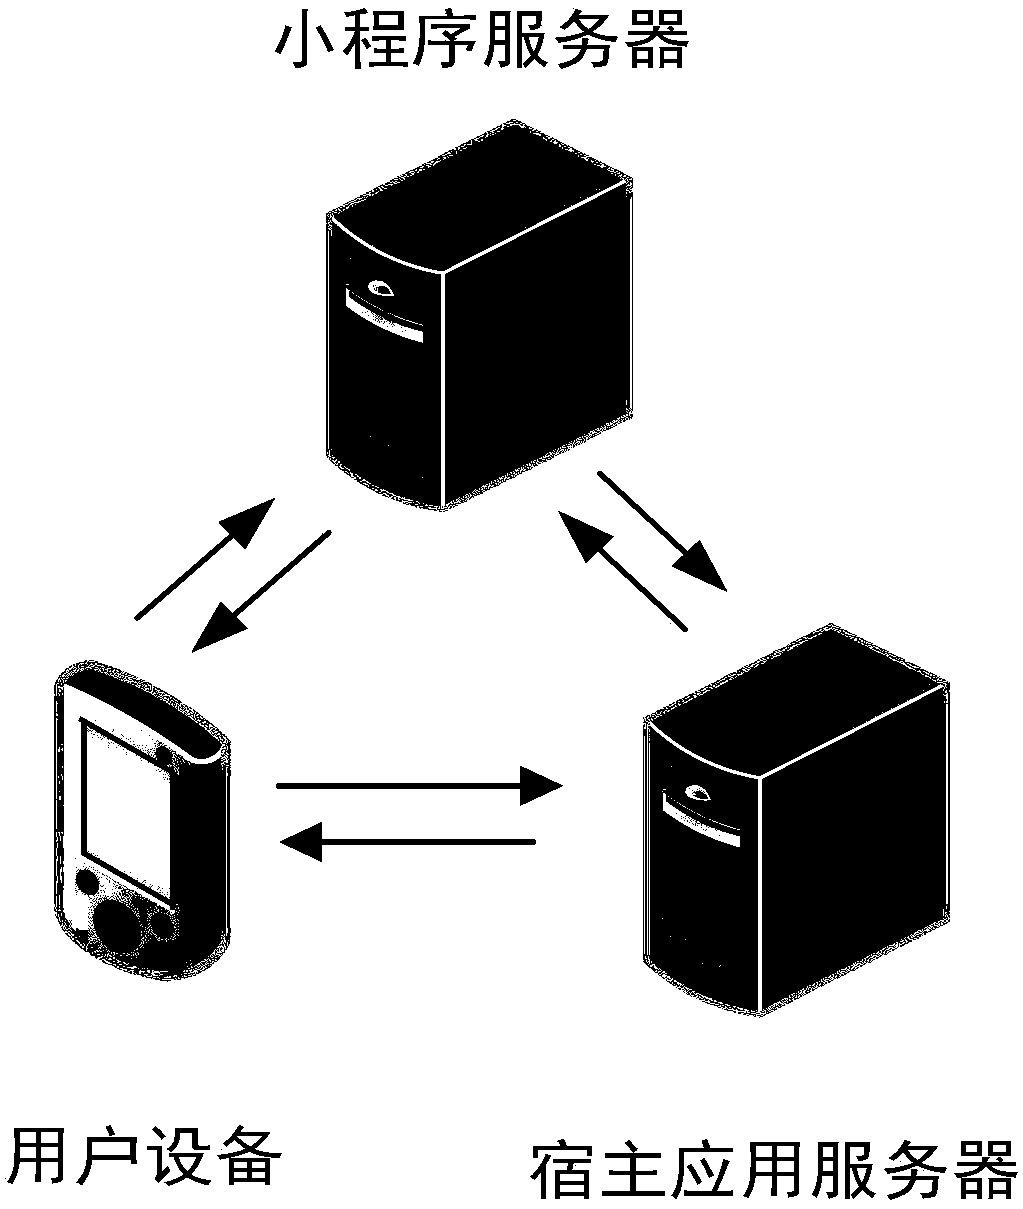 A method and apparatus for searching for a hosting program